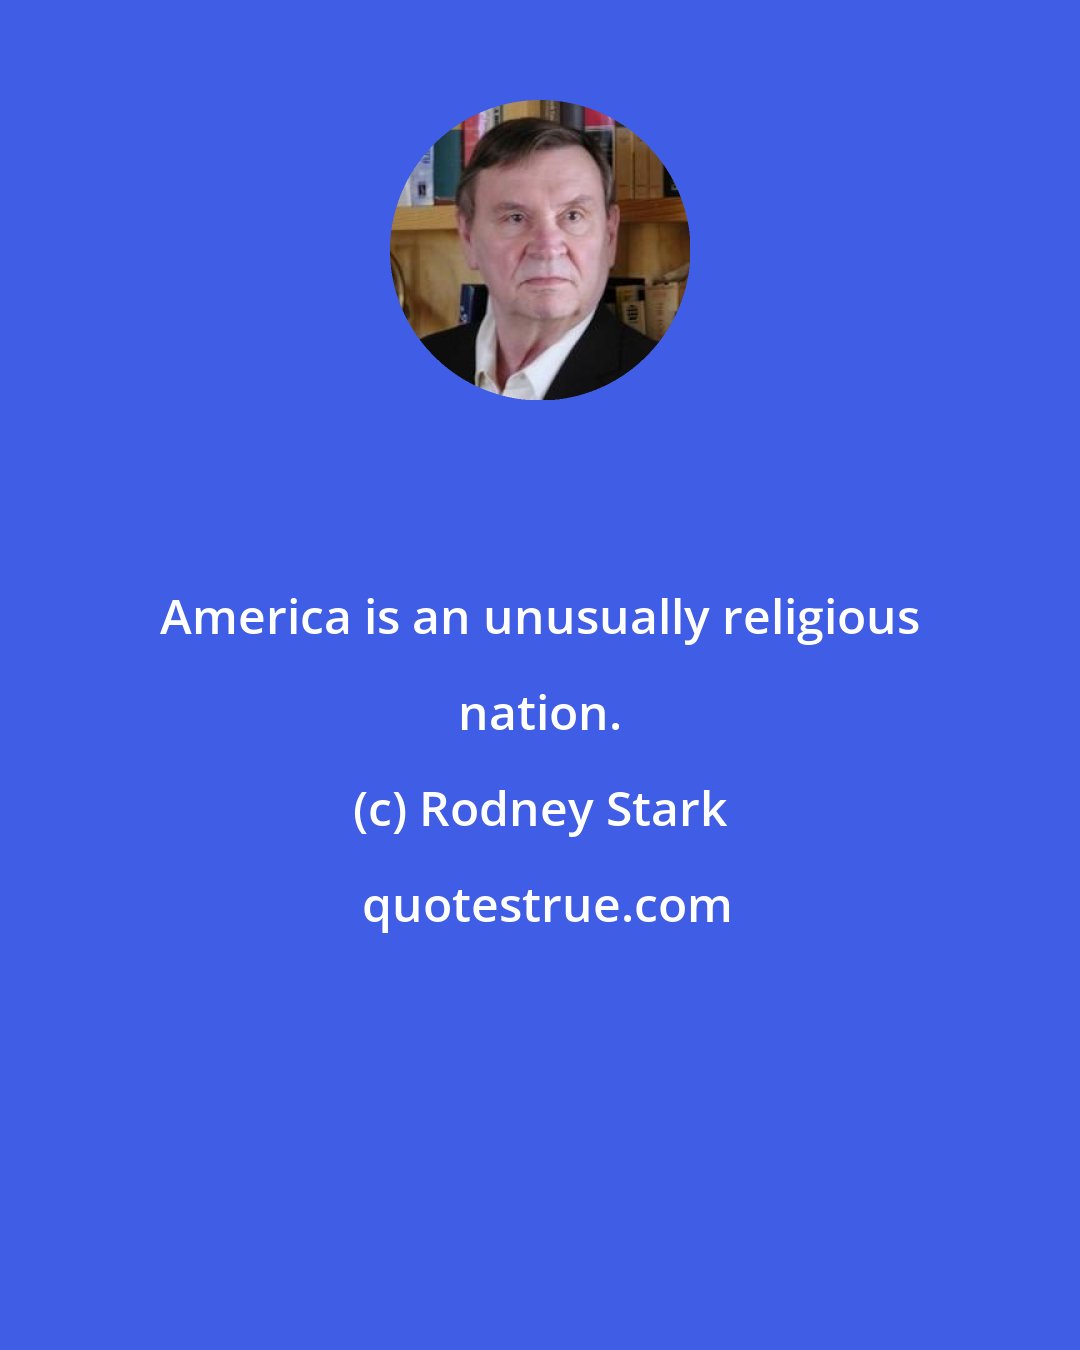 Rodney Stark: America is an unusually religious nation.